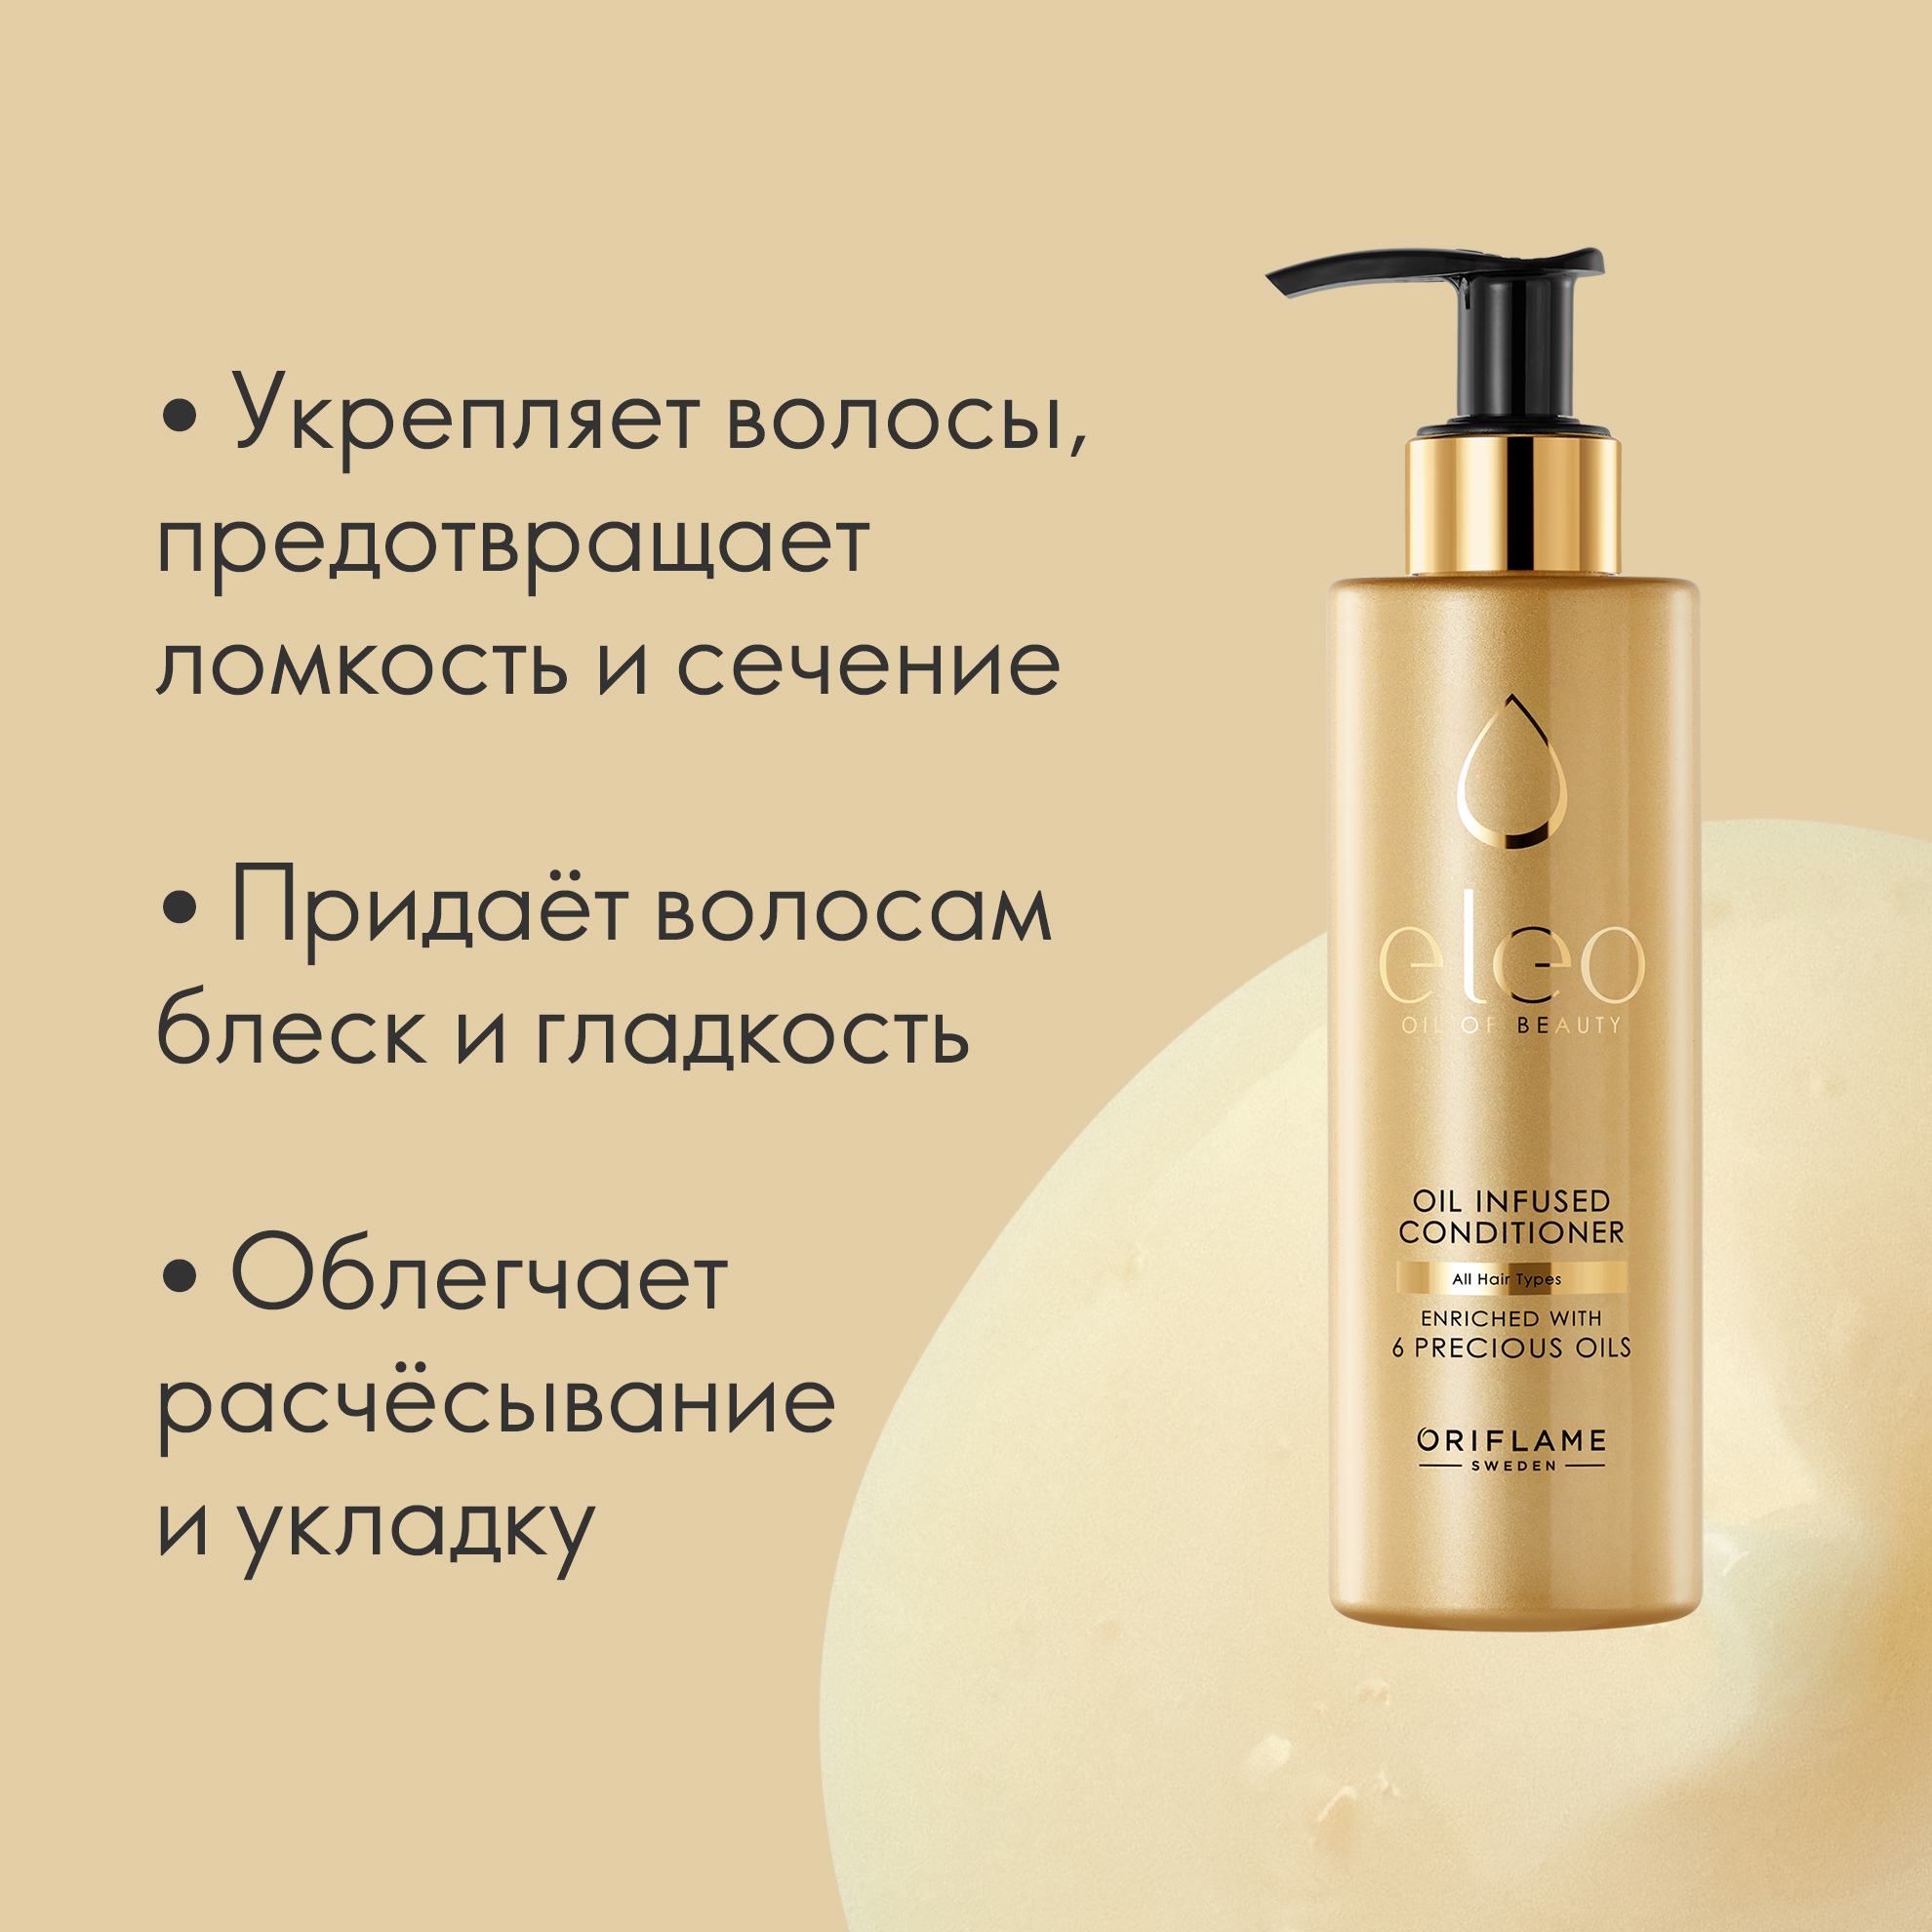 https://media-cdn.oriflame.com/productImage?externalMediaId=product-management-media%2fProducts%2f38597%2fRU%2f38597_3.png&id=15404434&version=1